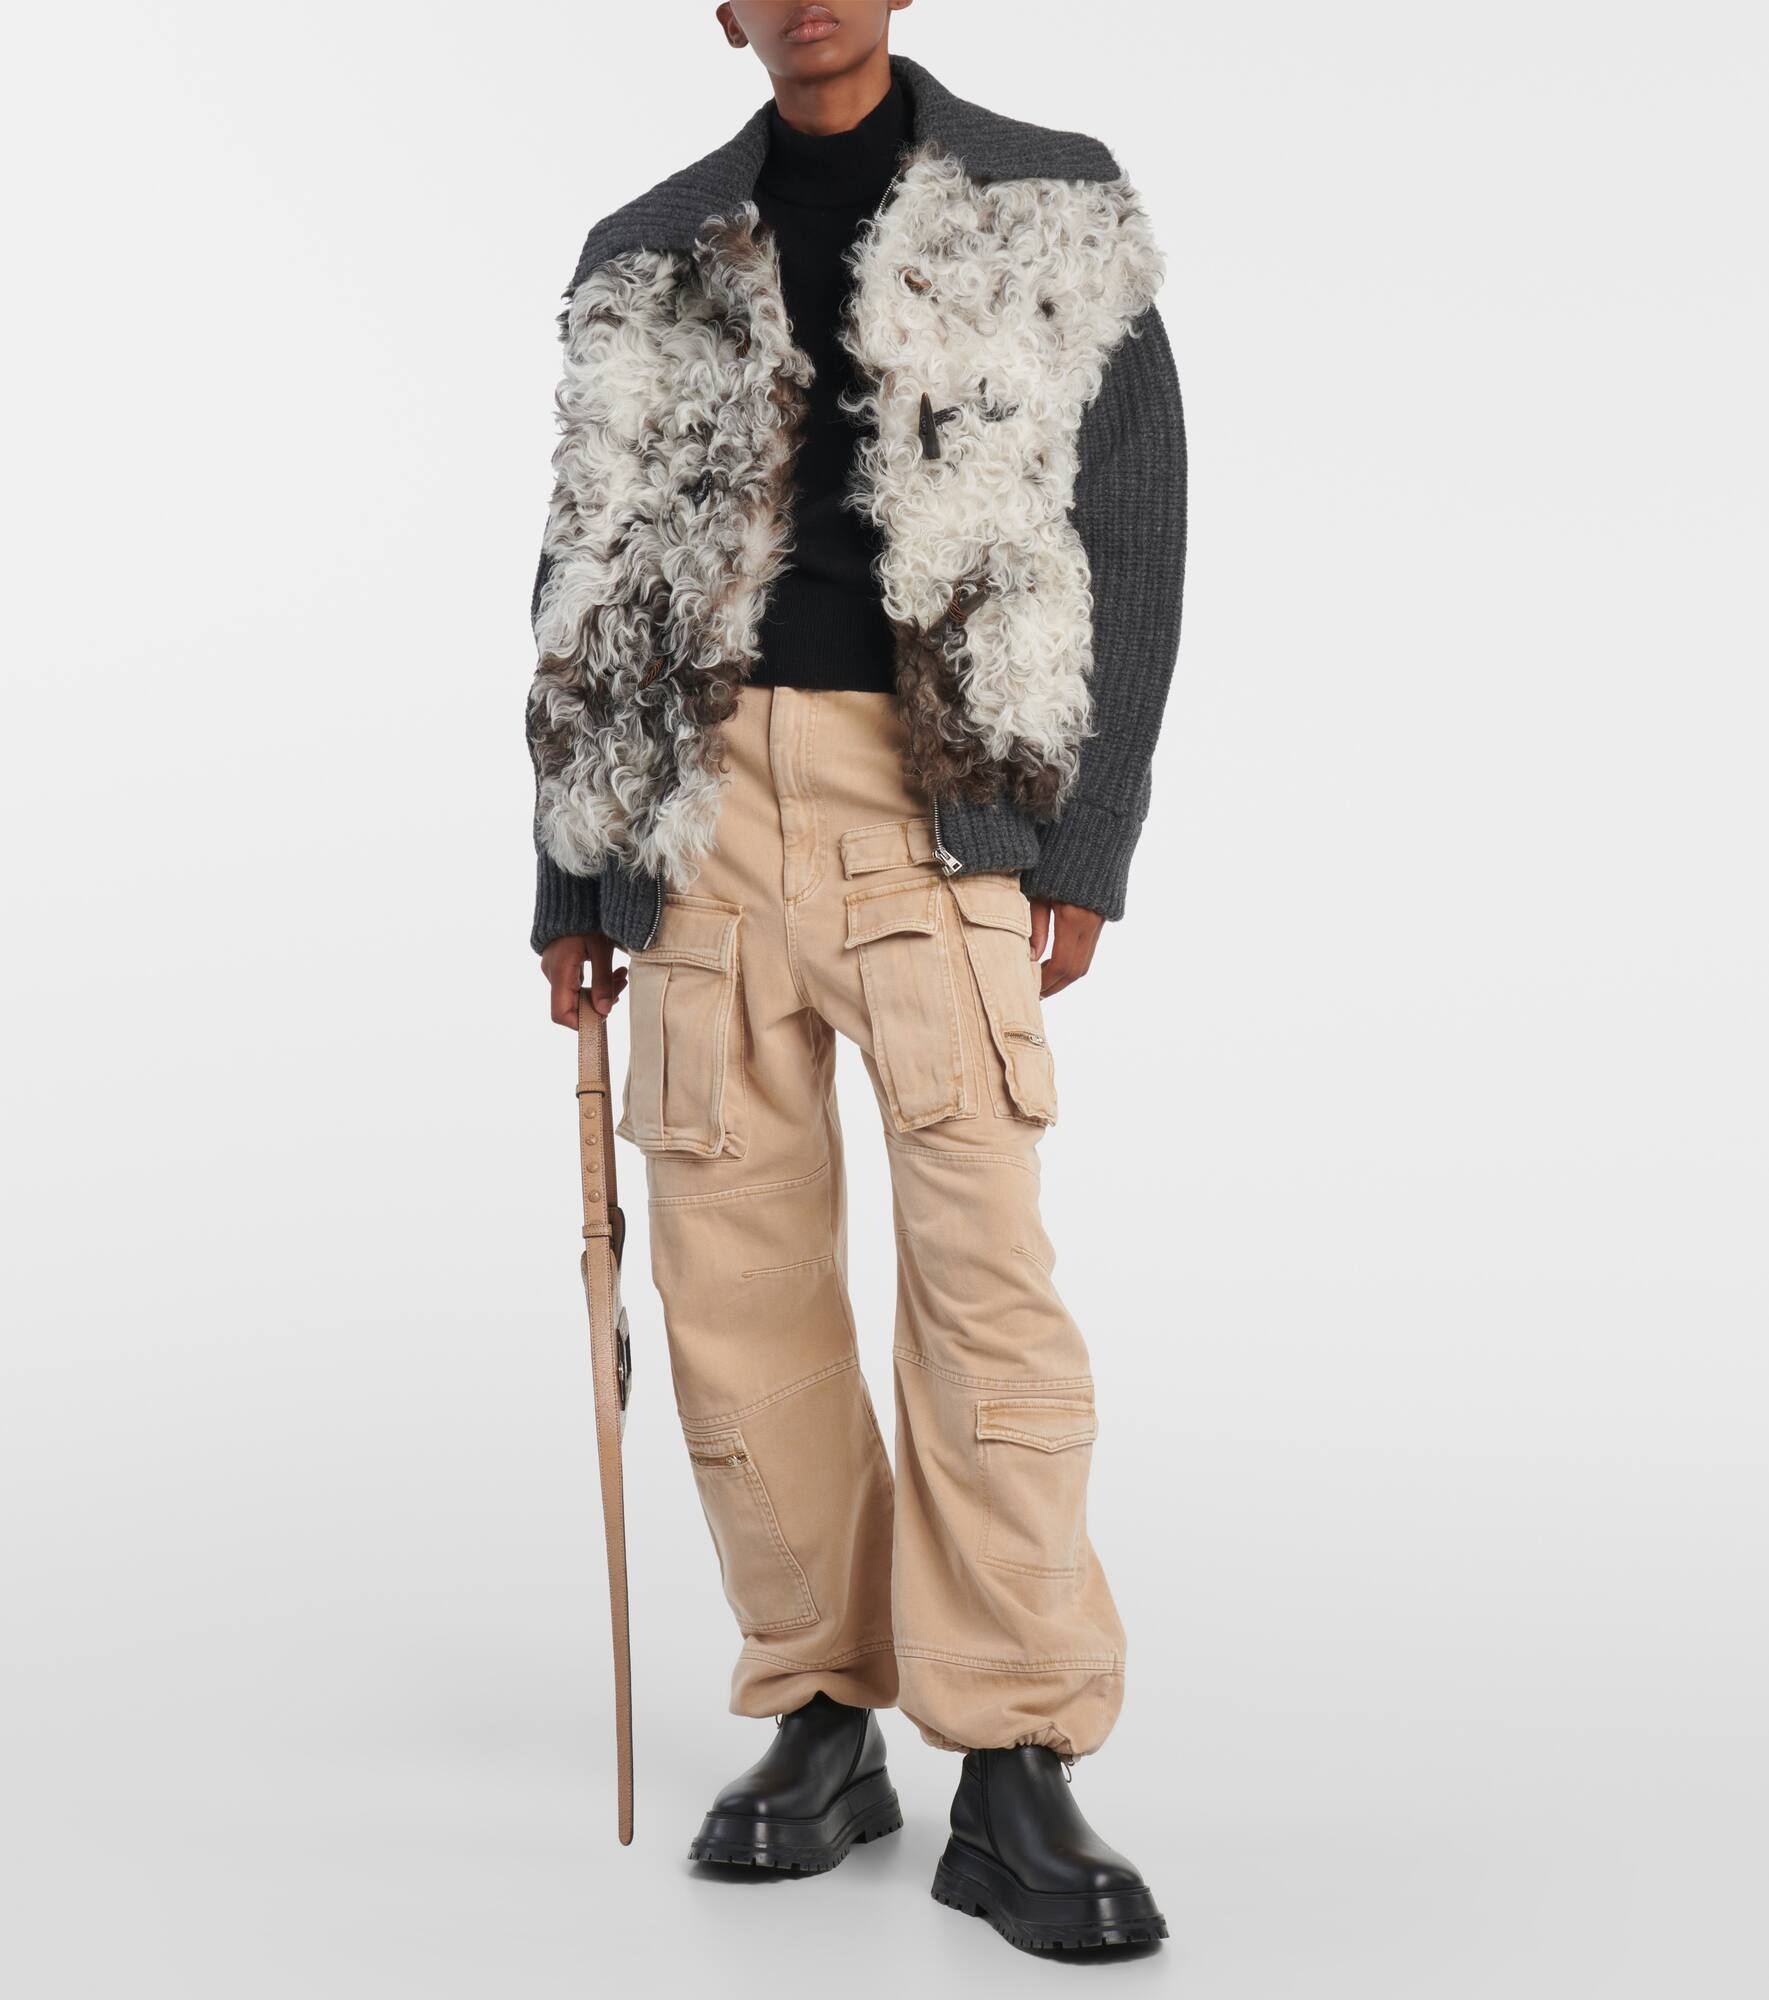 The Big Chill shearling and wool jacket - 2